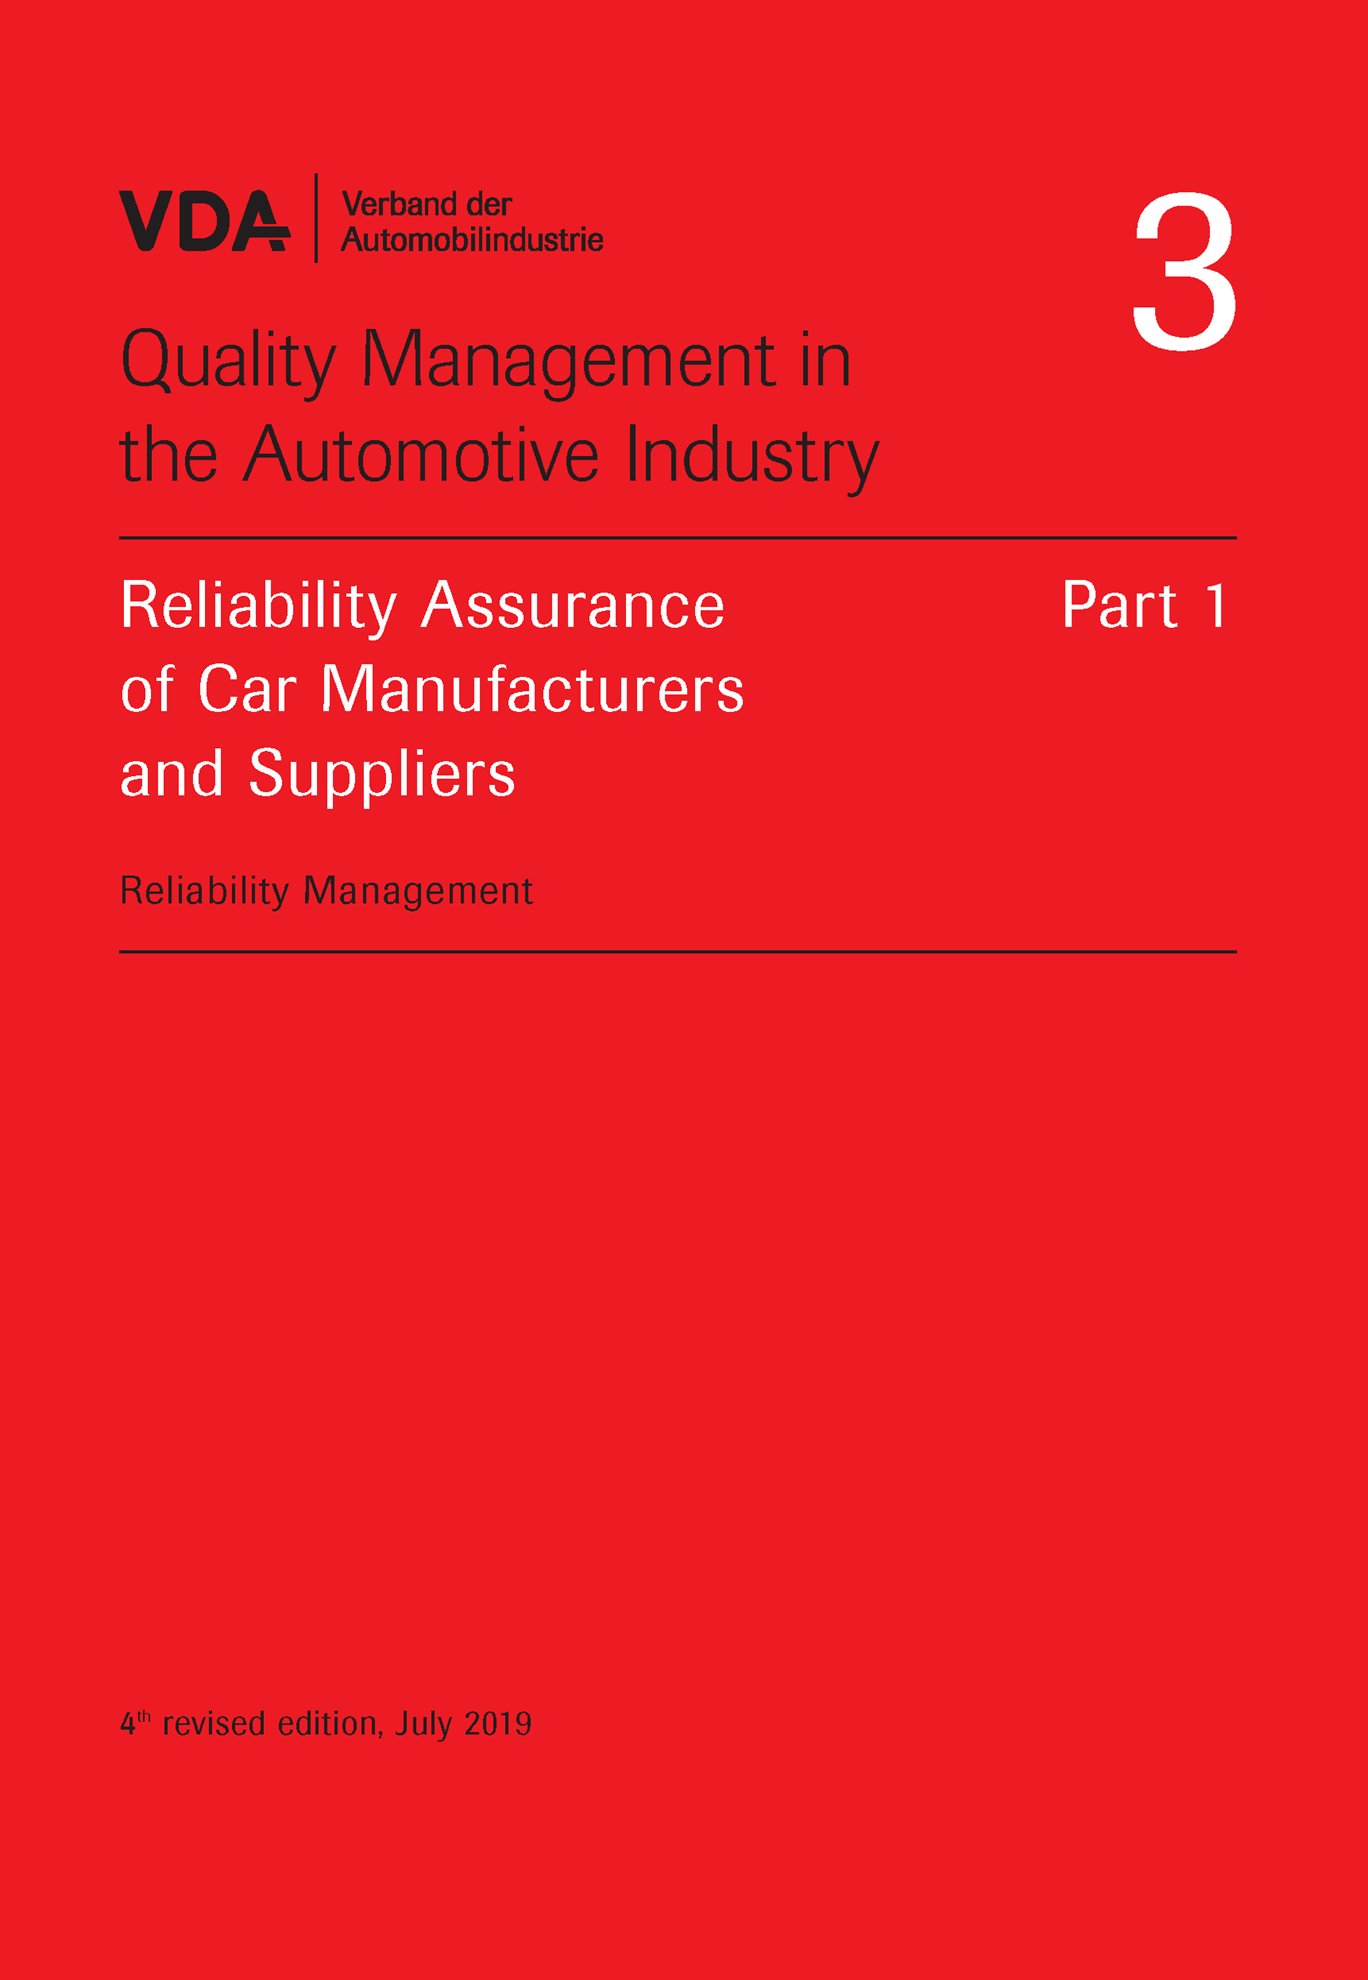 Náhľad  VDA Volume 3 Part 1 Reliability Assurance of Car Manufacturers and Suppliers - Reliability Management, 4th revised edition, July 2019 1.7.2019